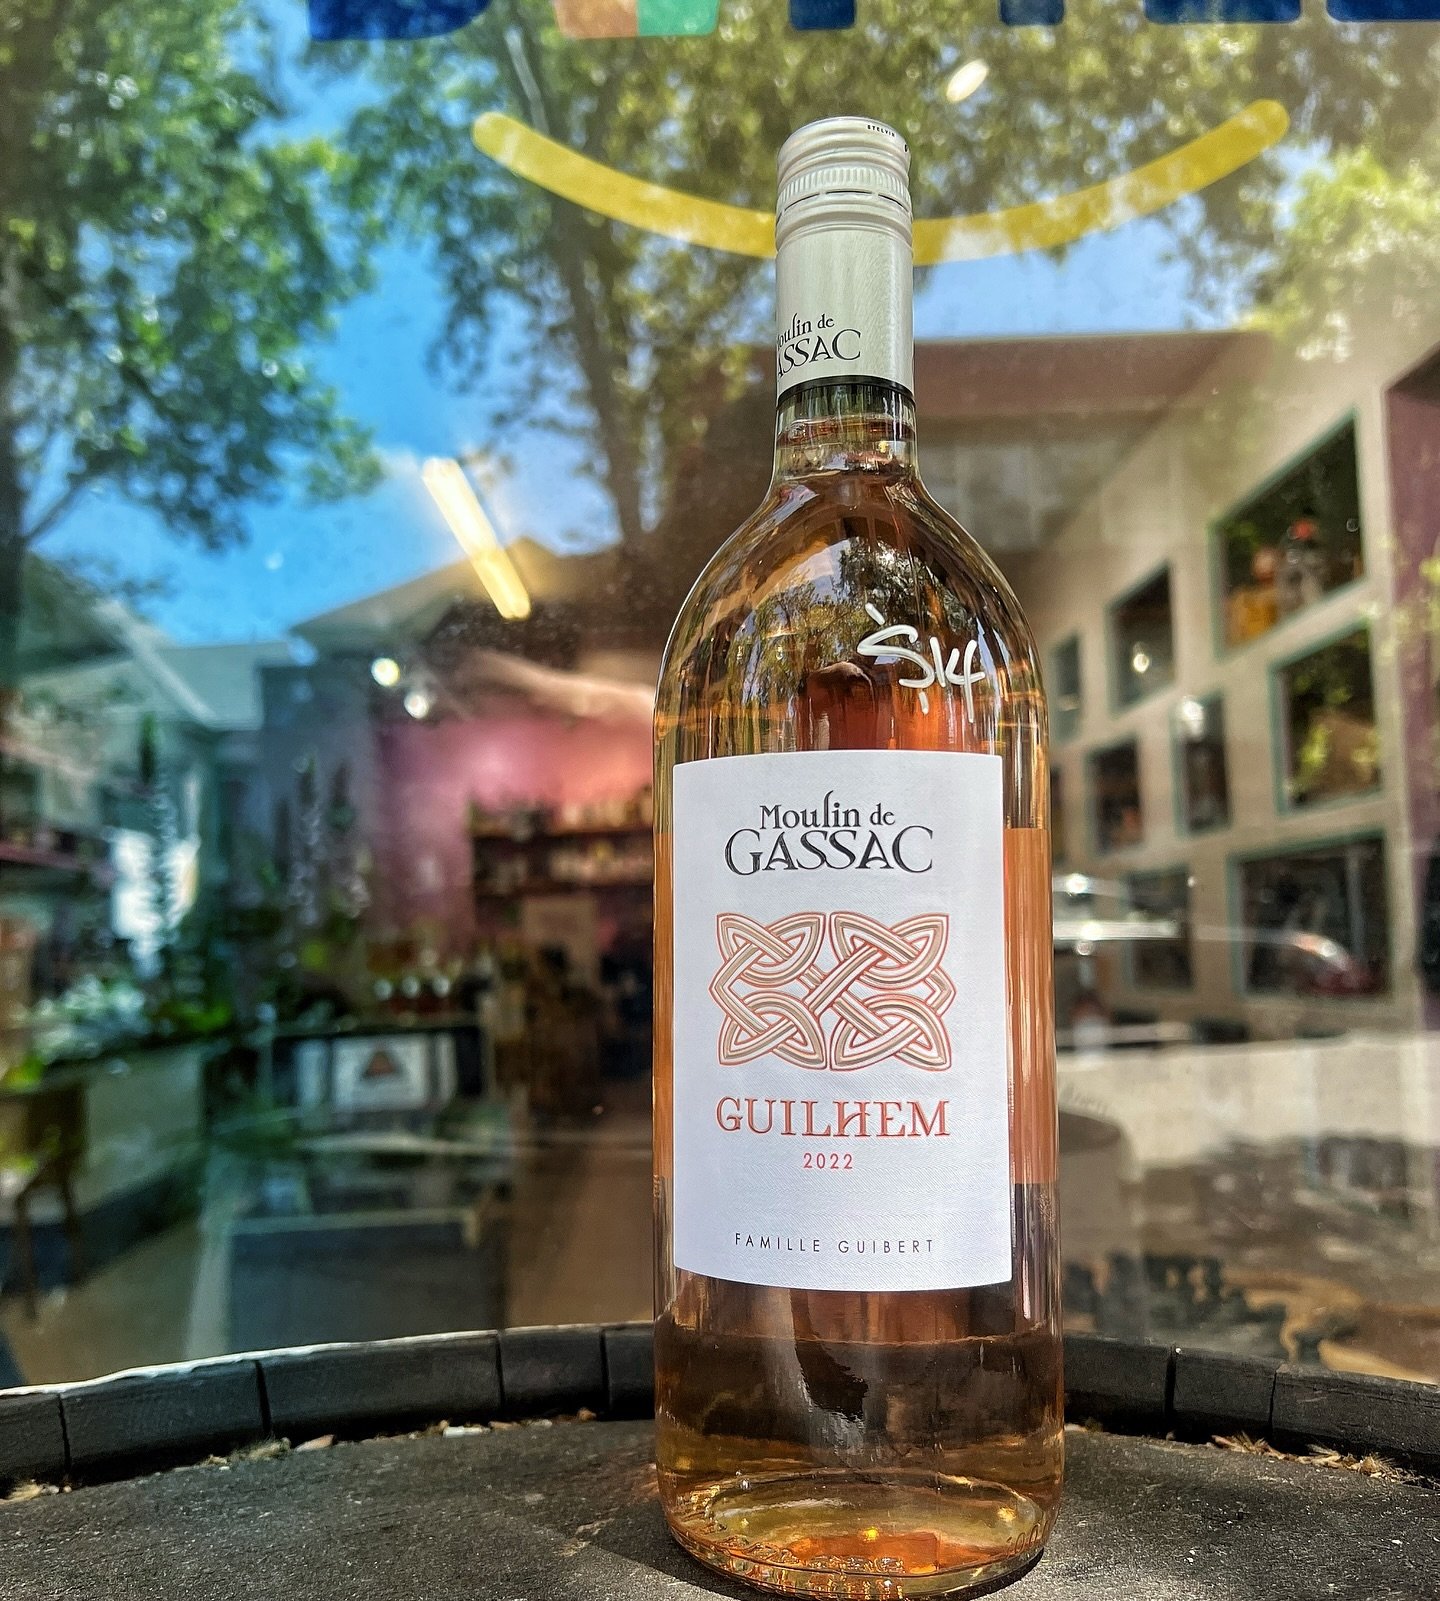 Ros&eacute; from the Languedoc in France 🇫🇷 - $14 !!!!

60% grenache, 20% syrah, 20% carignan | Terra Vitis certification

This wine is lively, vivid rose pink color. Some salmon glints. Pleasant and intense with a floral nose and notes of citruses